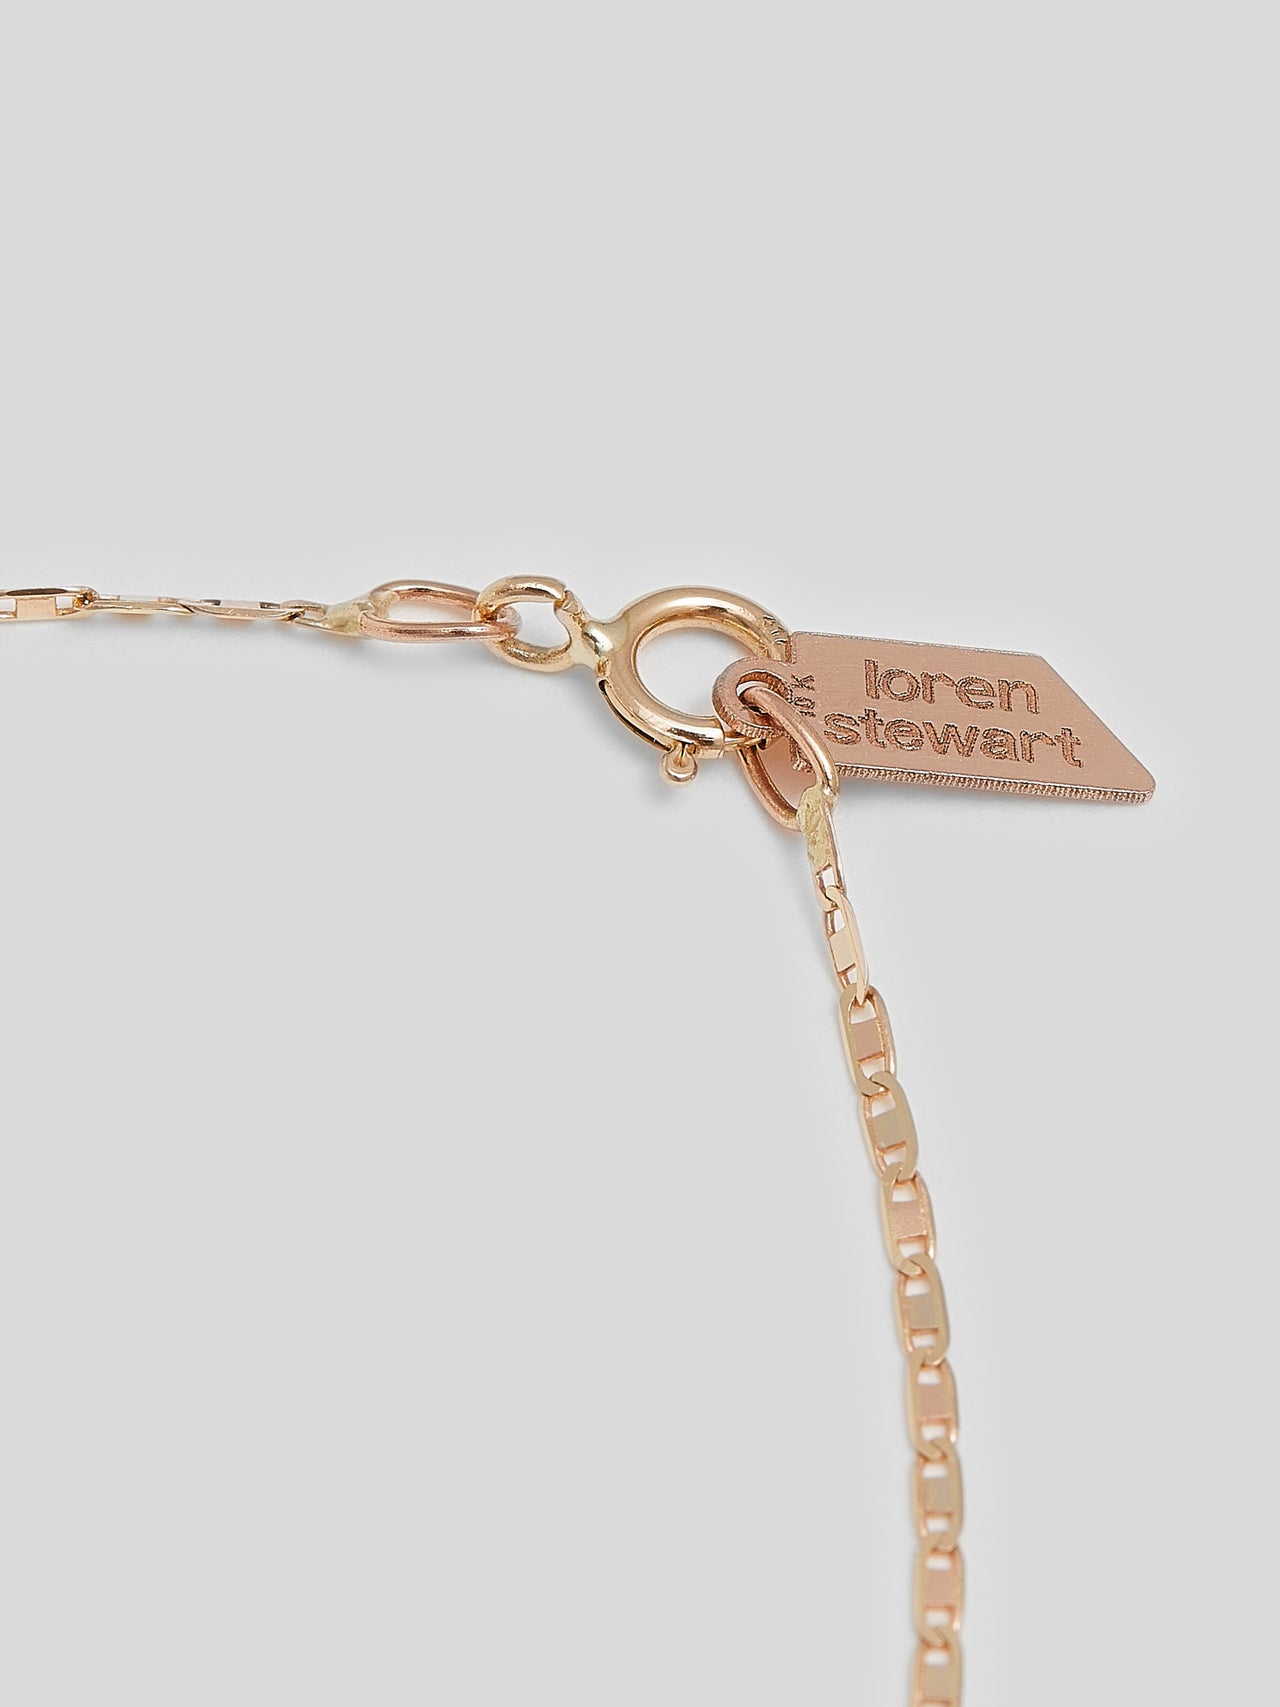 Product image of 10kt yellow gold thin chain necklace on white background.